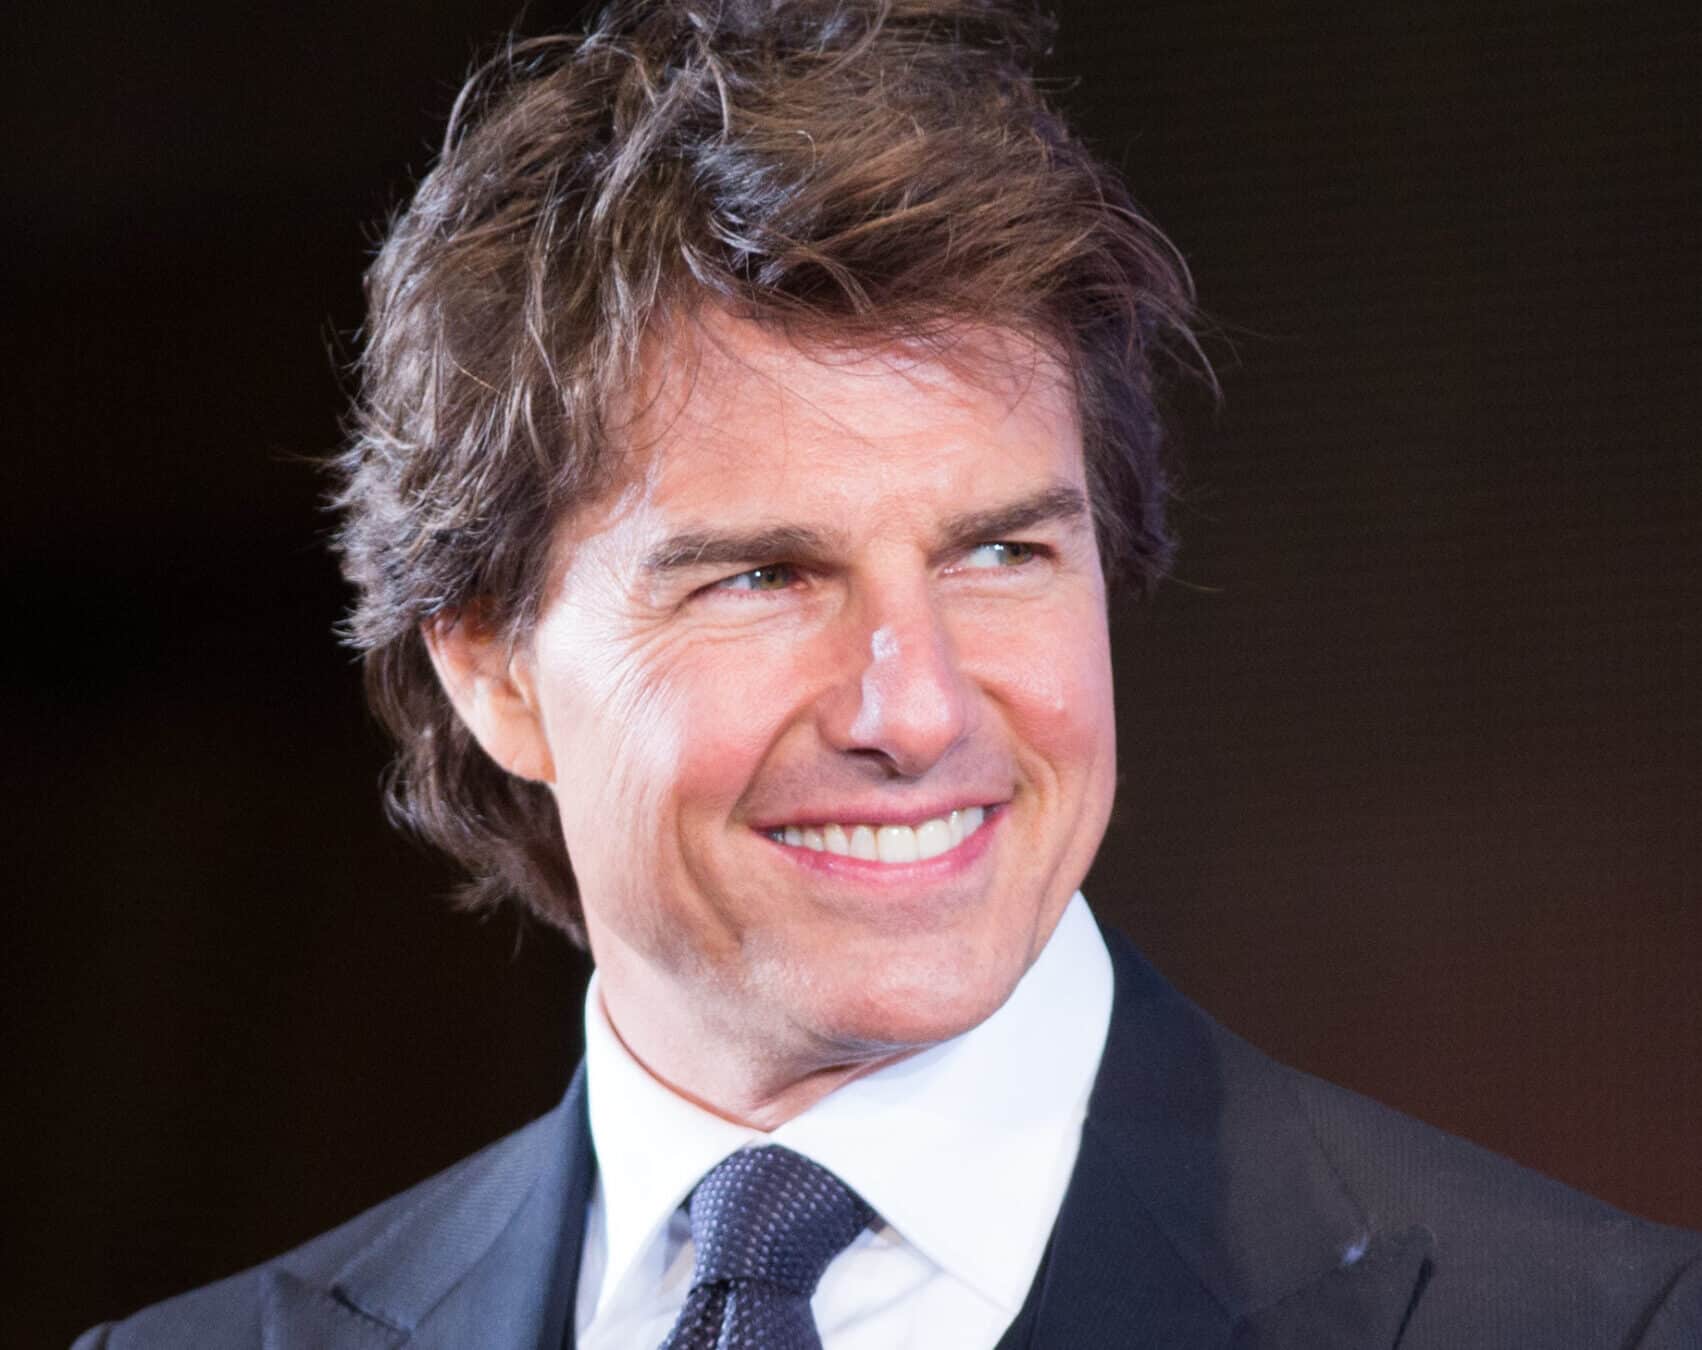 Tom Cruise wearing a suit.